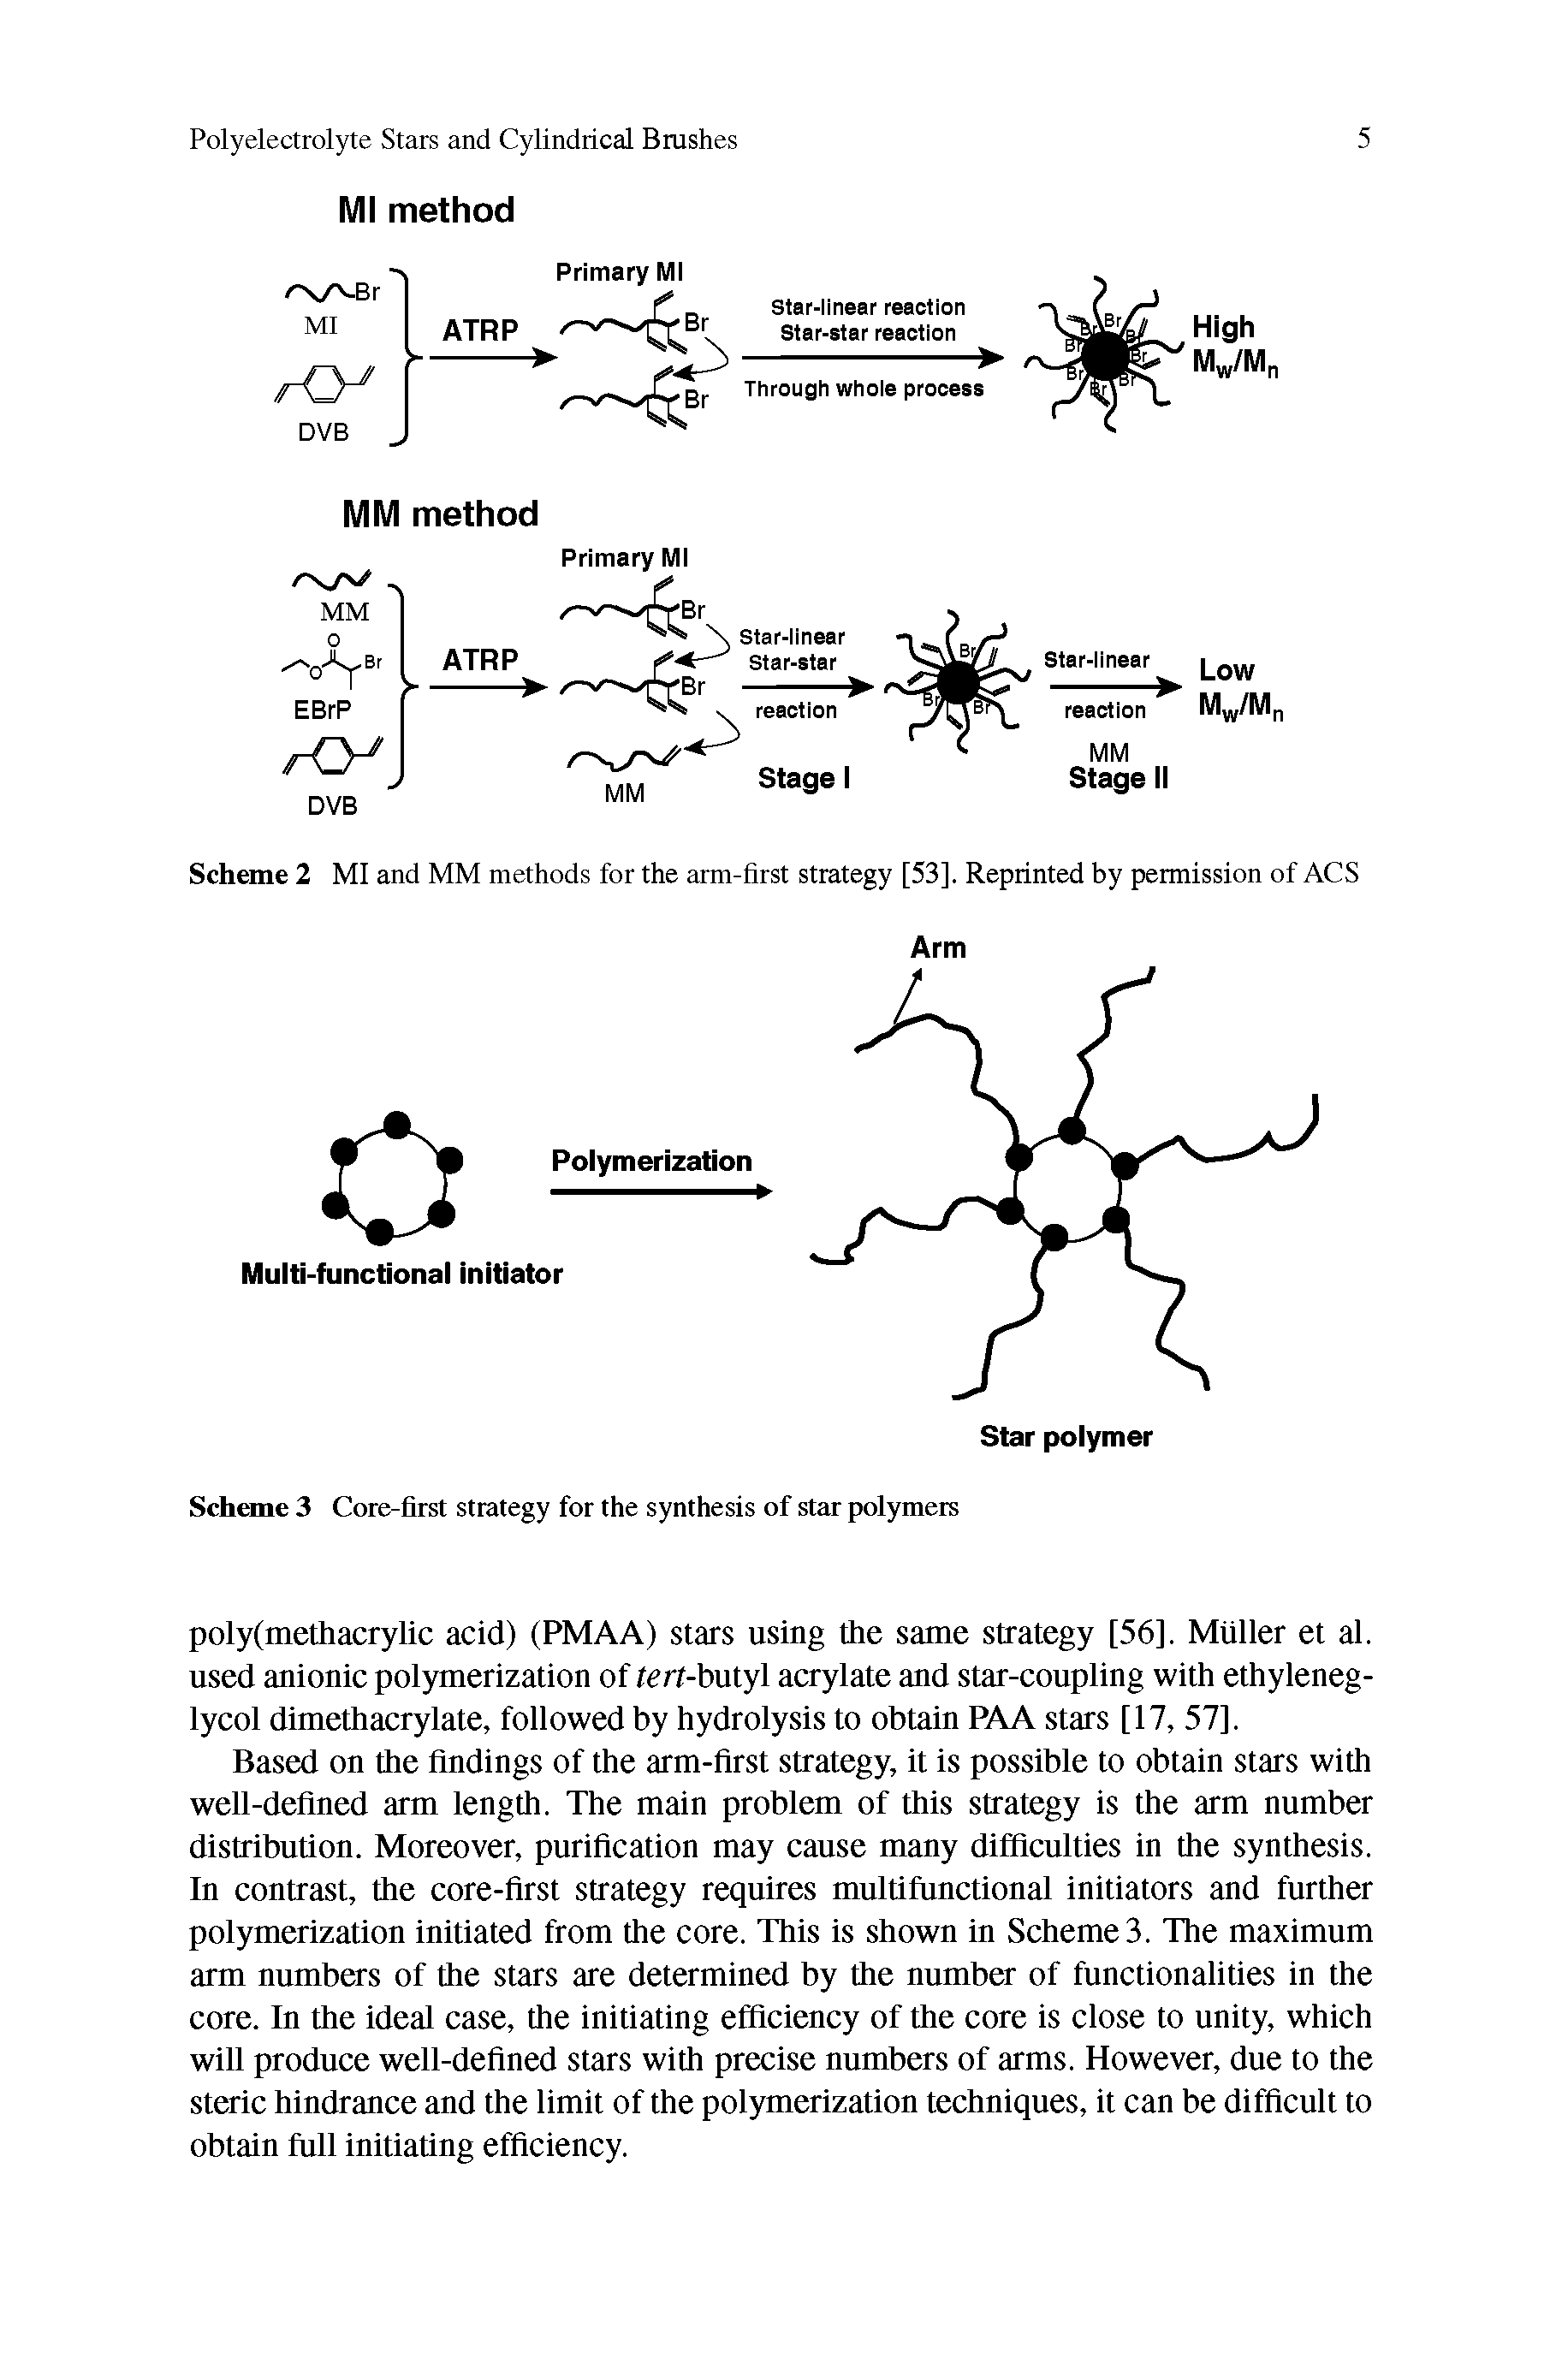 Scheme 3 Core-first strategy for the synthesis of star polymers...